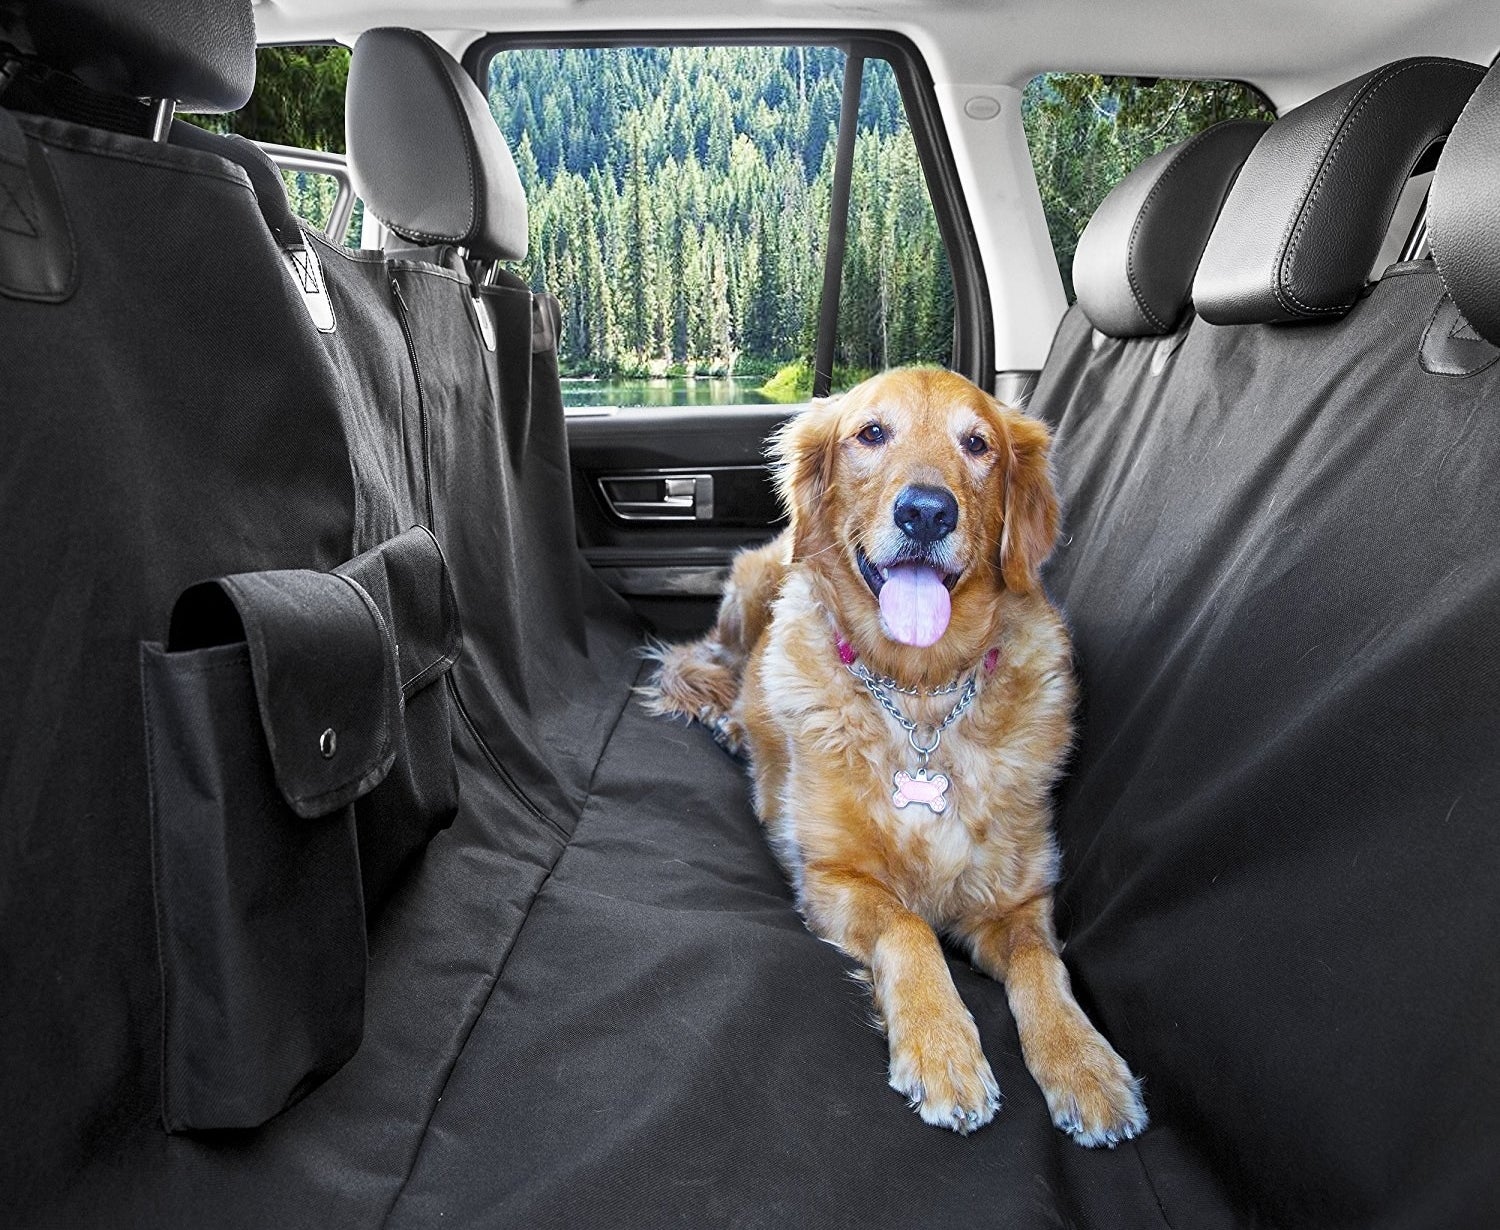 How dog owners can keep their car clean